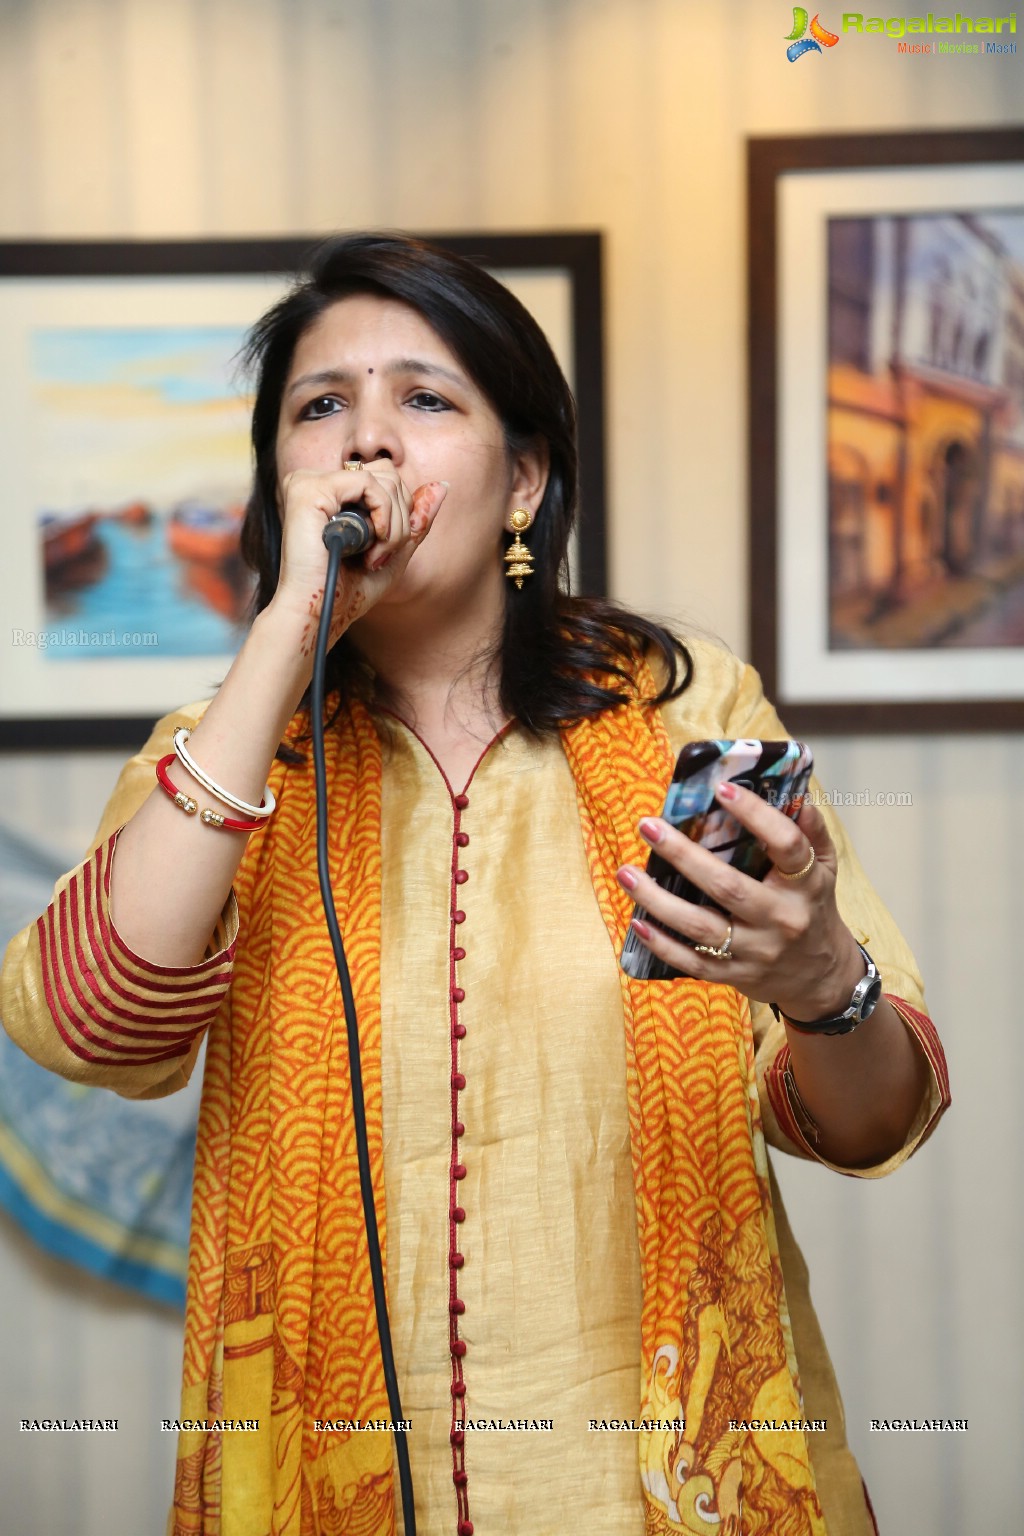 Rabindra Sangeet at The Gallery Cafe